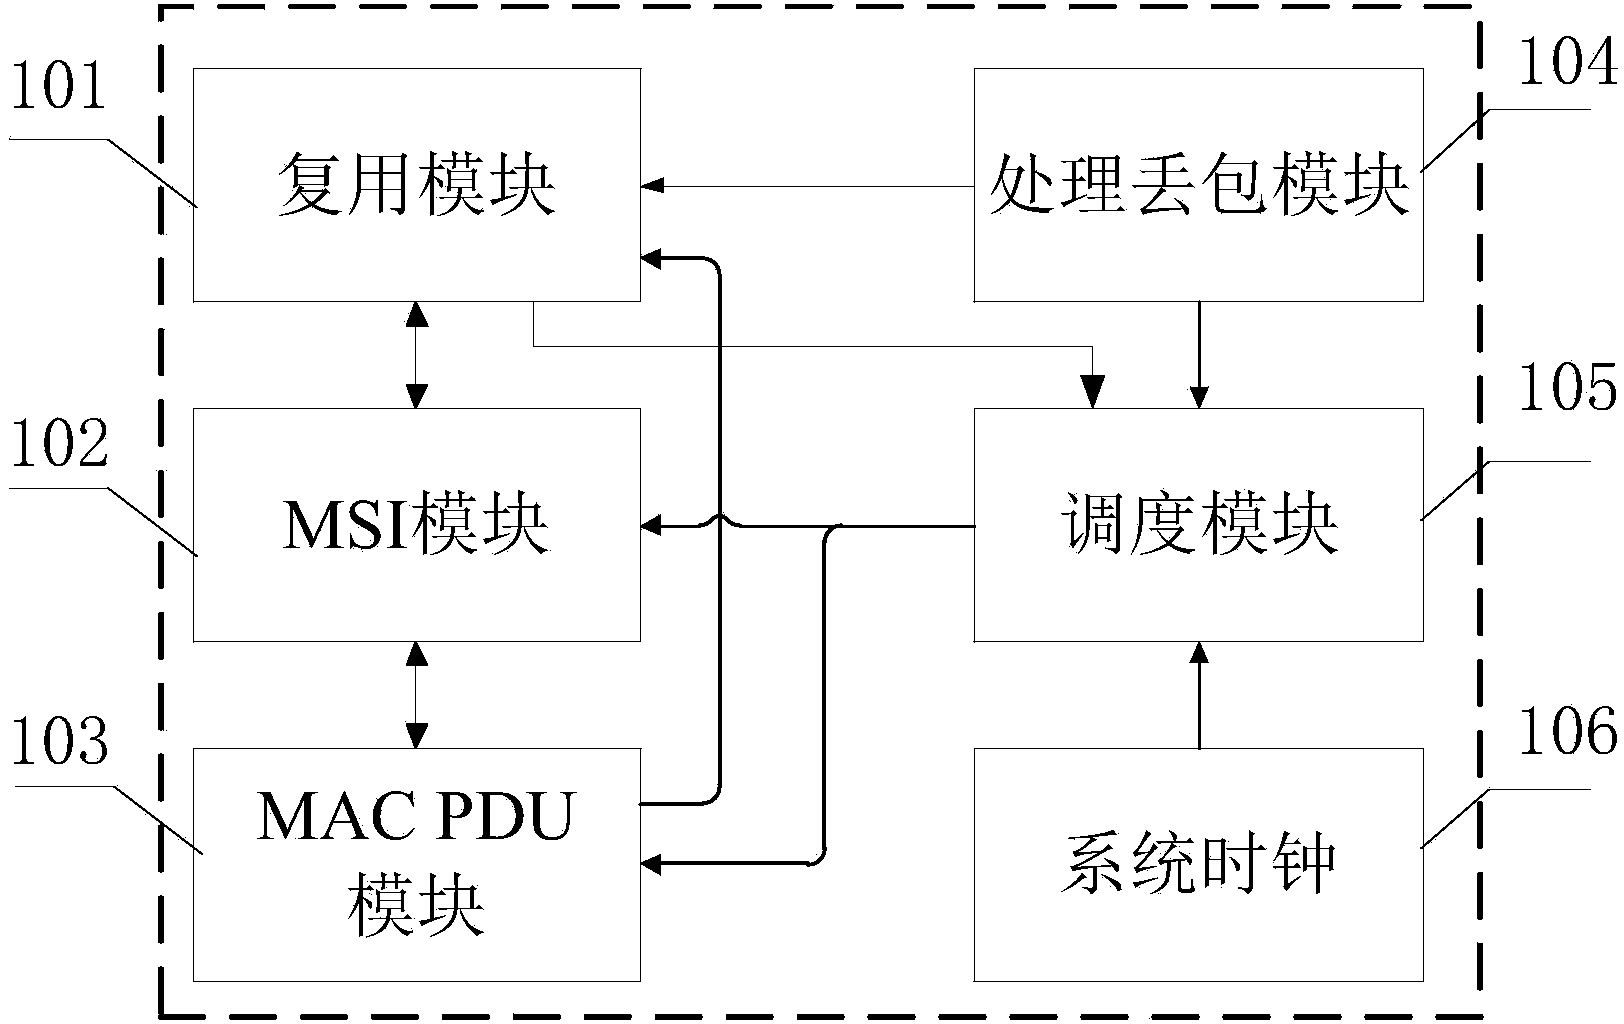 System for processing MBMS service by base station MAC layer in LTE system